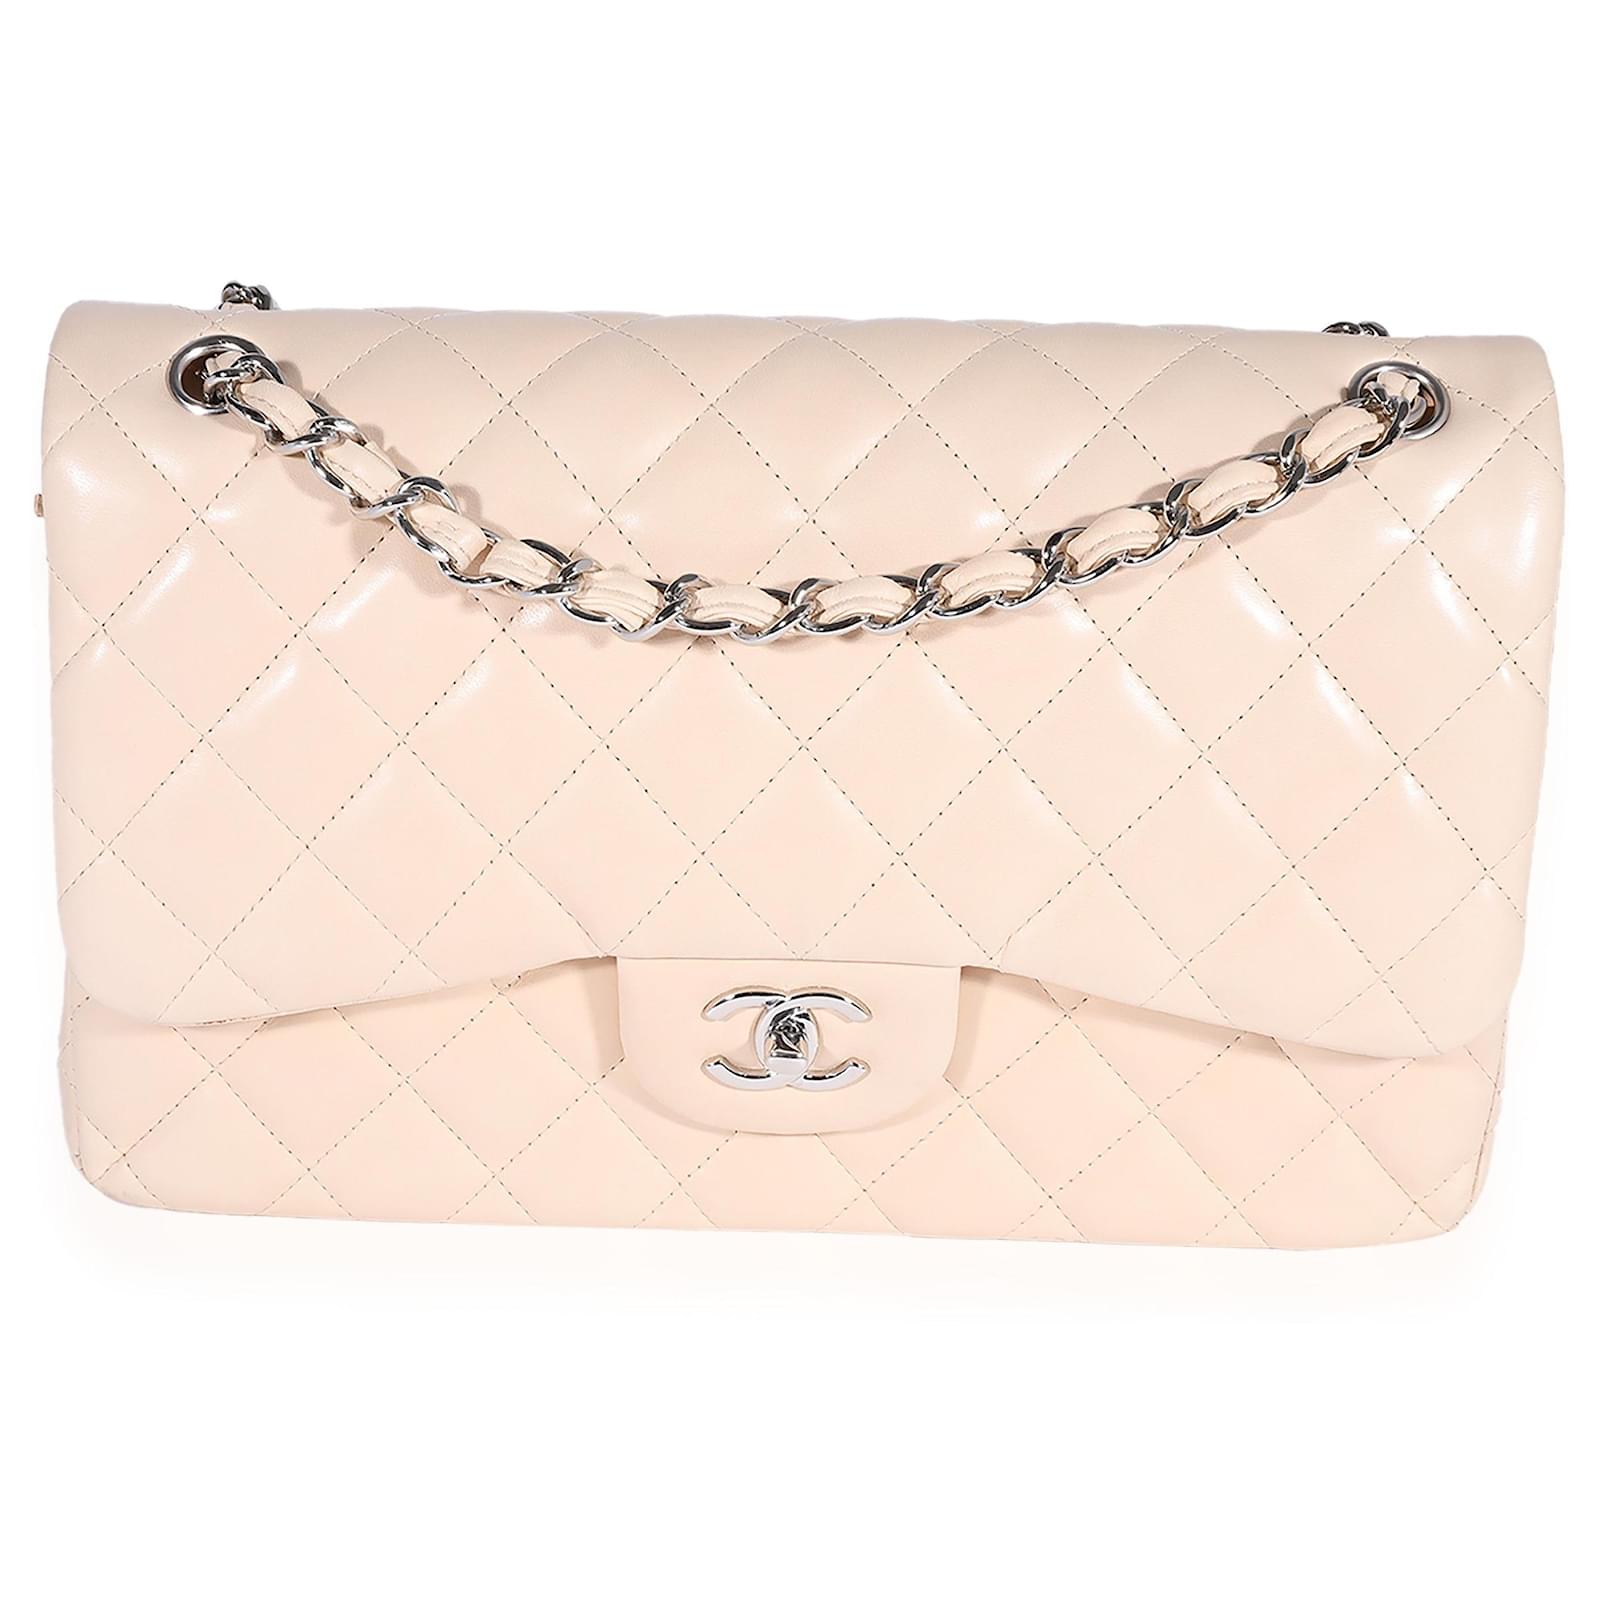 price of a classic chanel flap bag